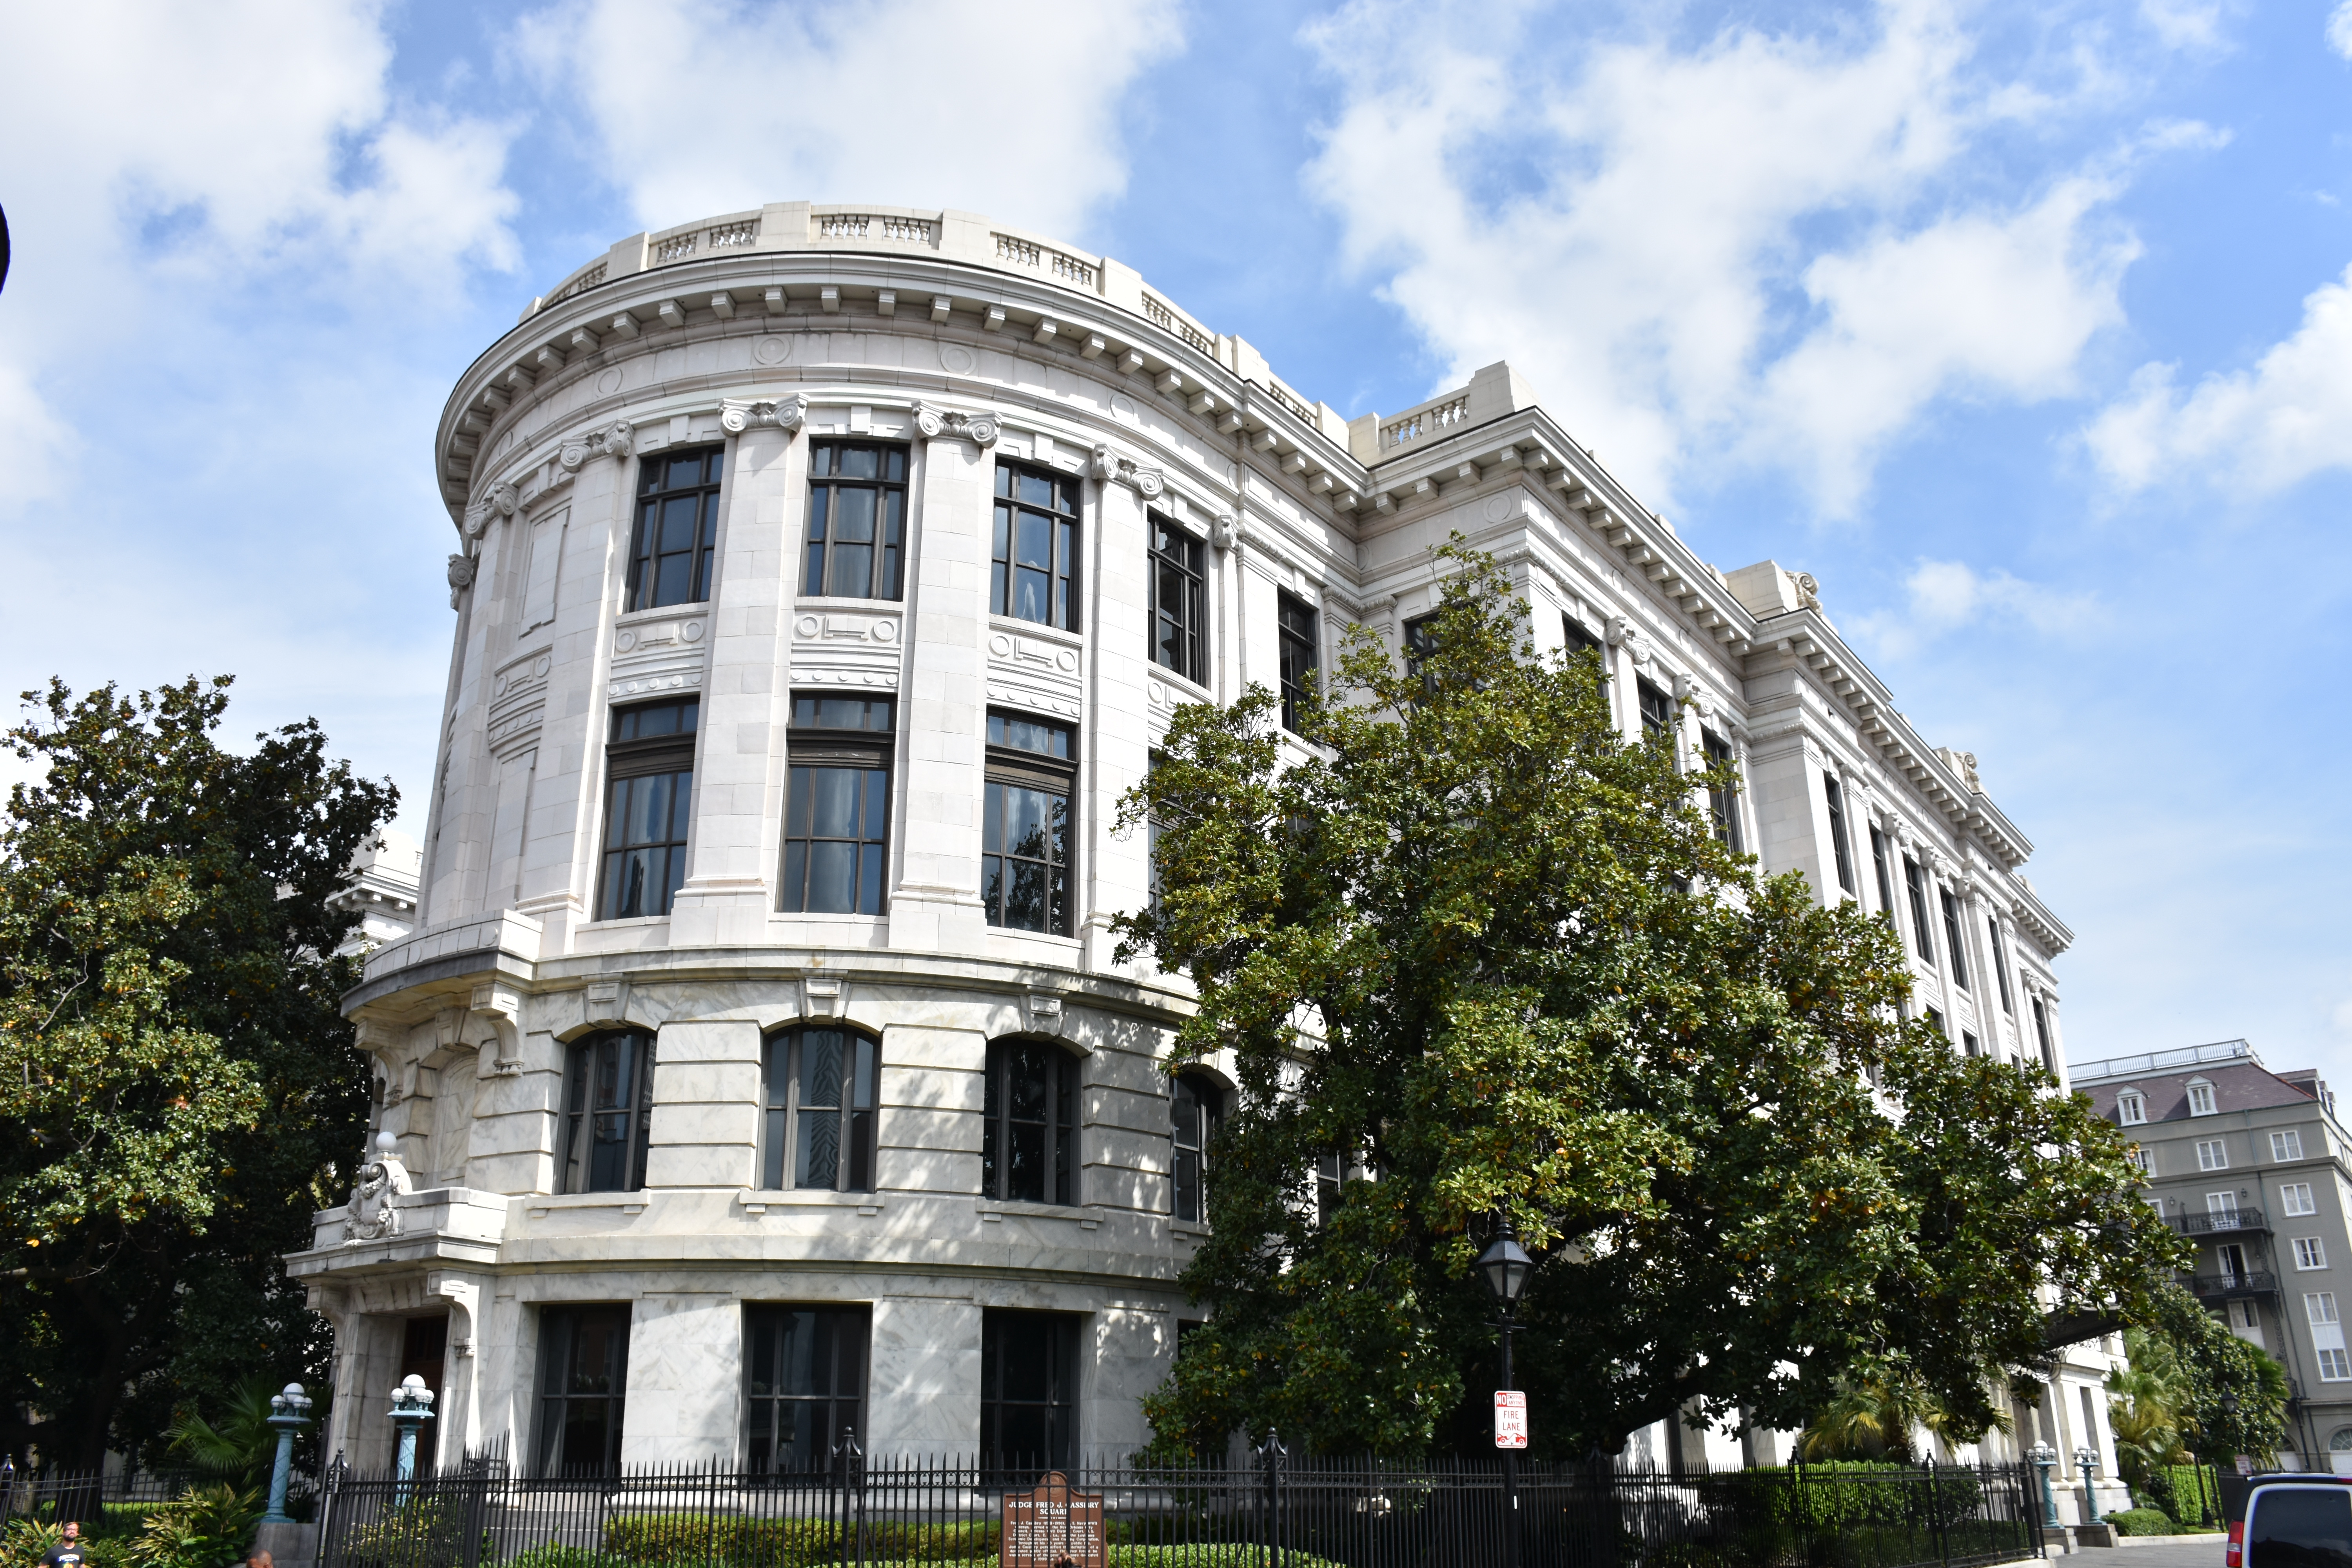 Panoramic image of Louisiana Supreme Court building with statue of